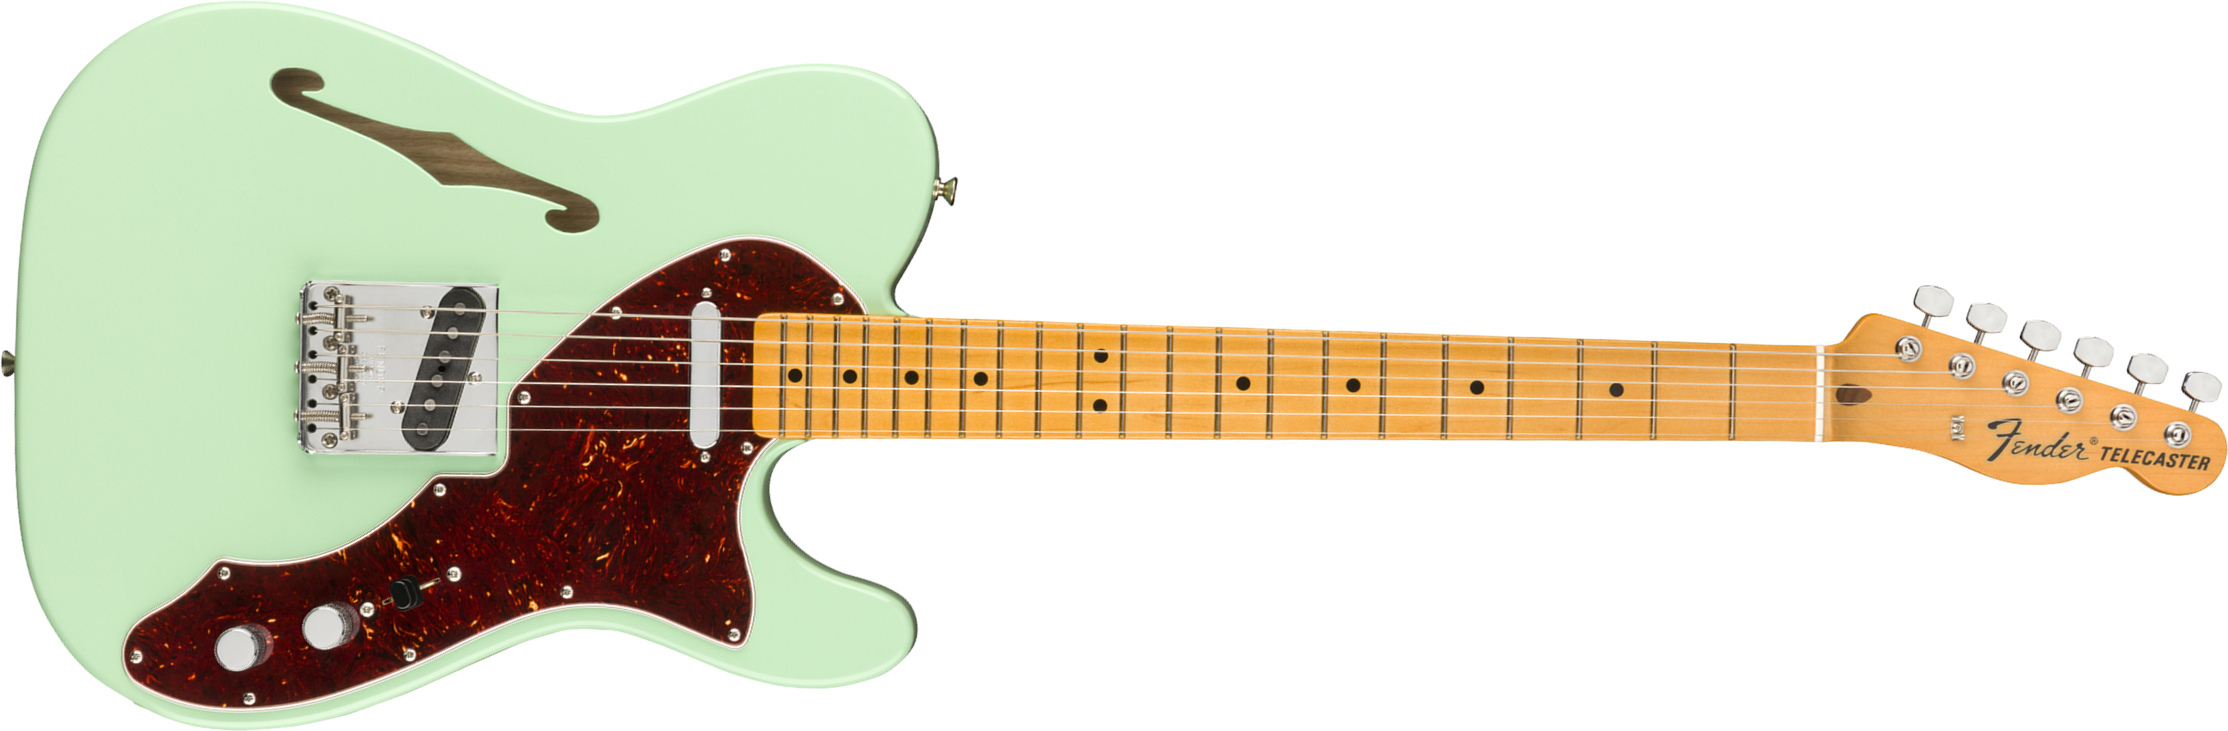 Fender Tele 60s Thinline American Original Usa Ss Mn - Surf Green - Tel shape electric guitar - Main picture